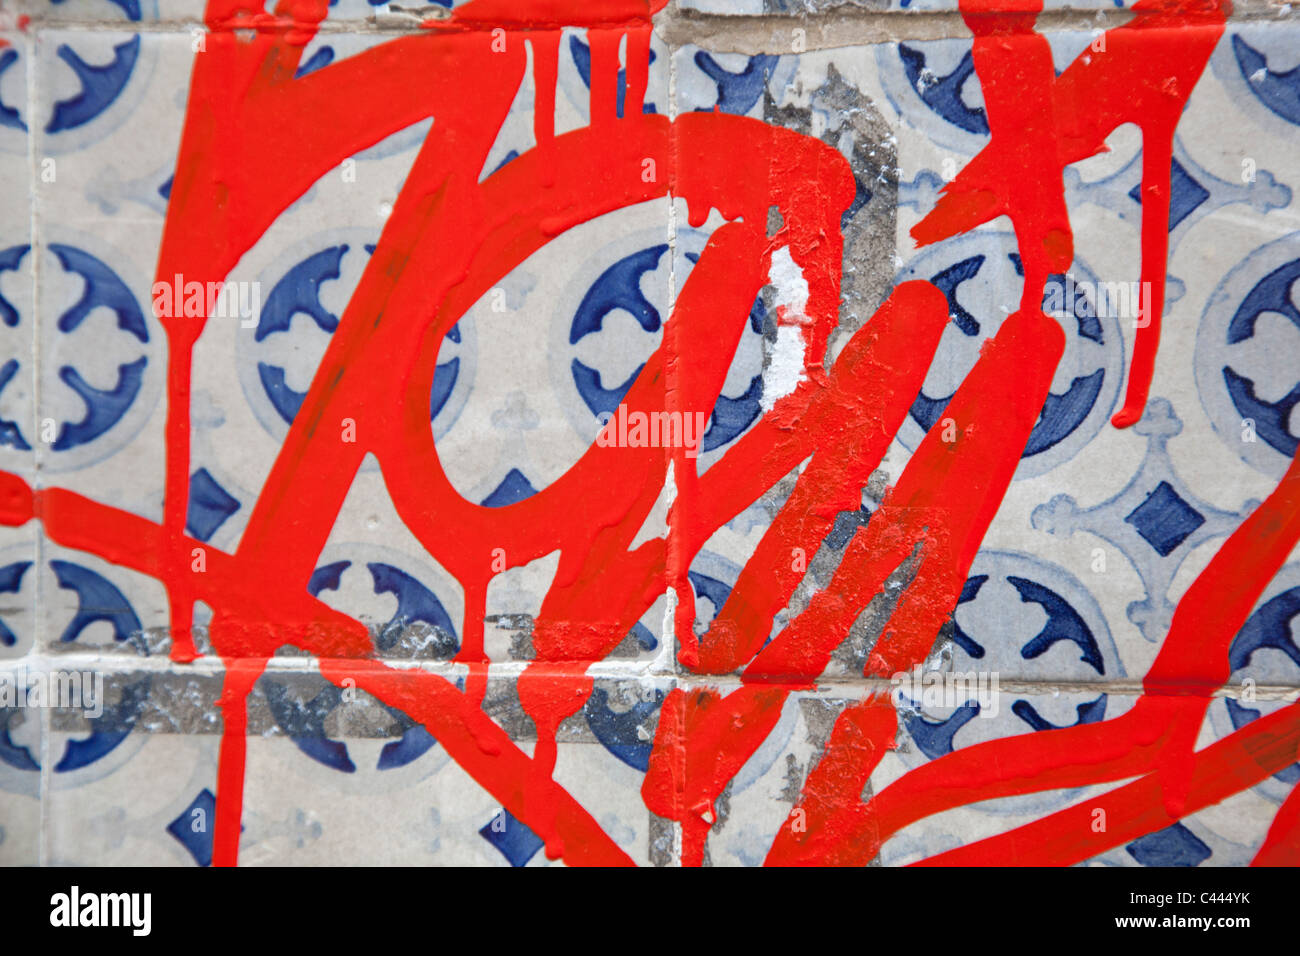 Detail of a graffiti tag on patterned tiles Stock Photo